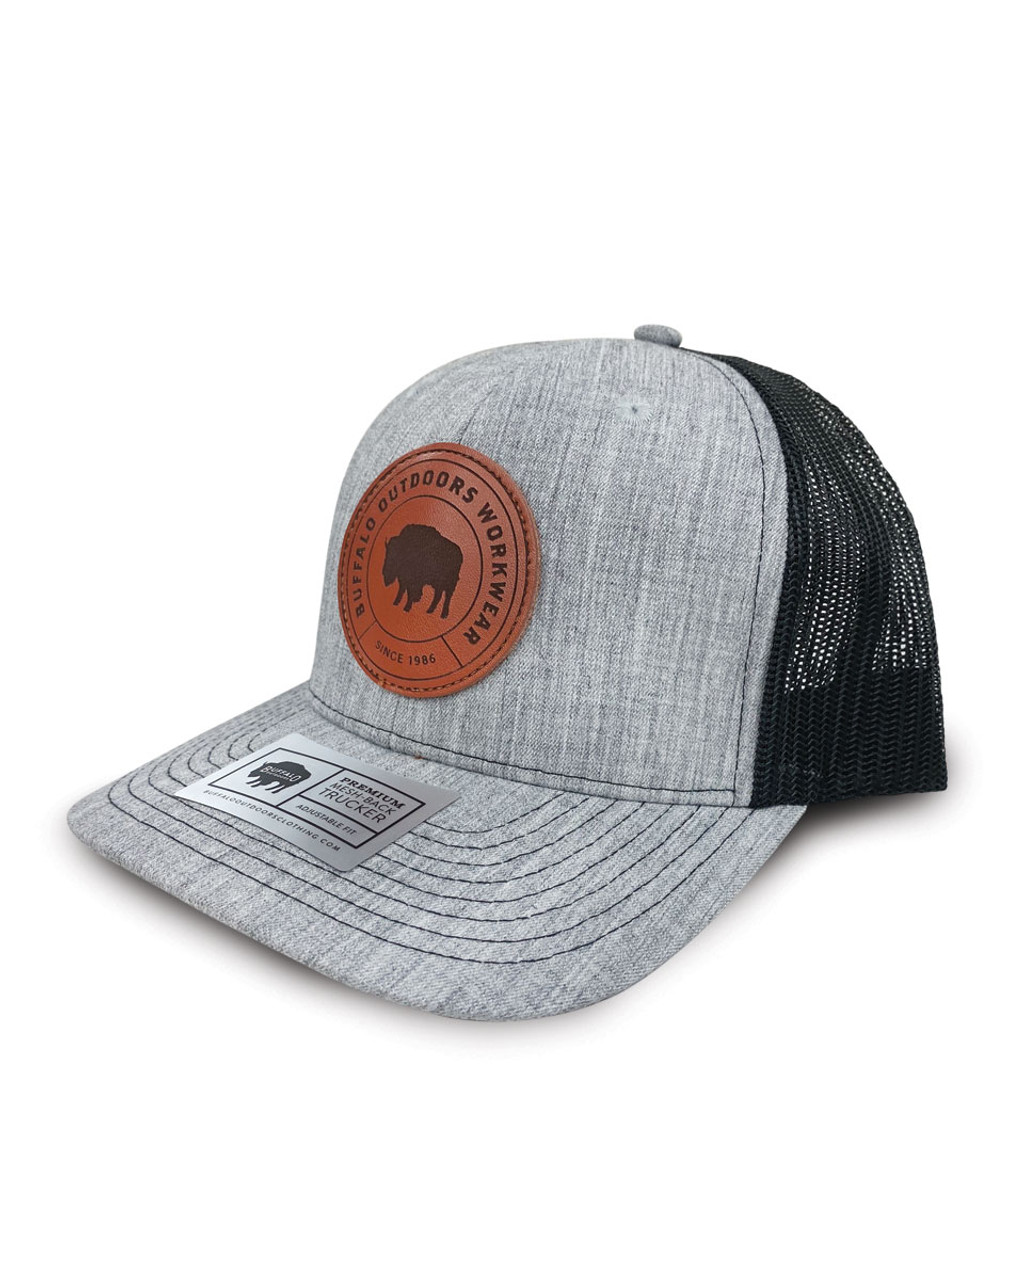 Trucker Hat, Lightweight & Breathable, Embroidered Logo, Adjustable, Cotton  with Polyester Mesh, Women & Mens Hat